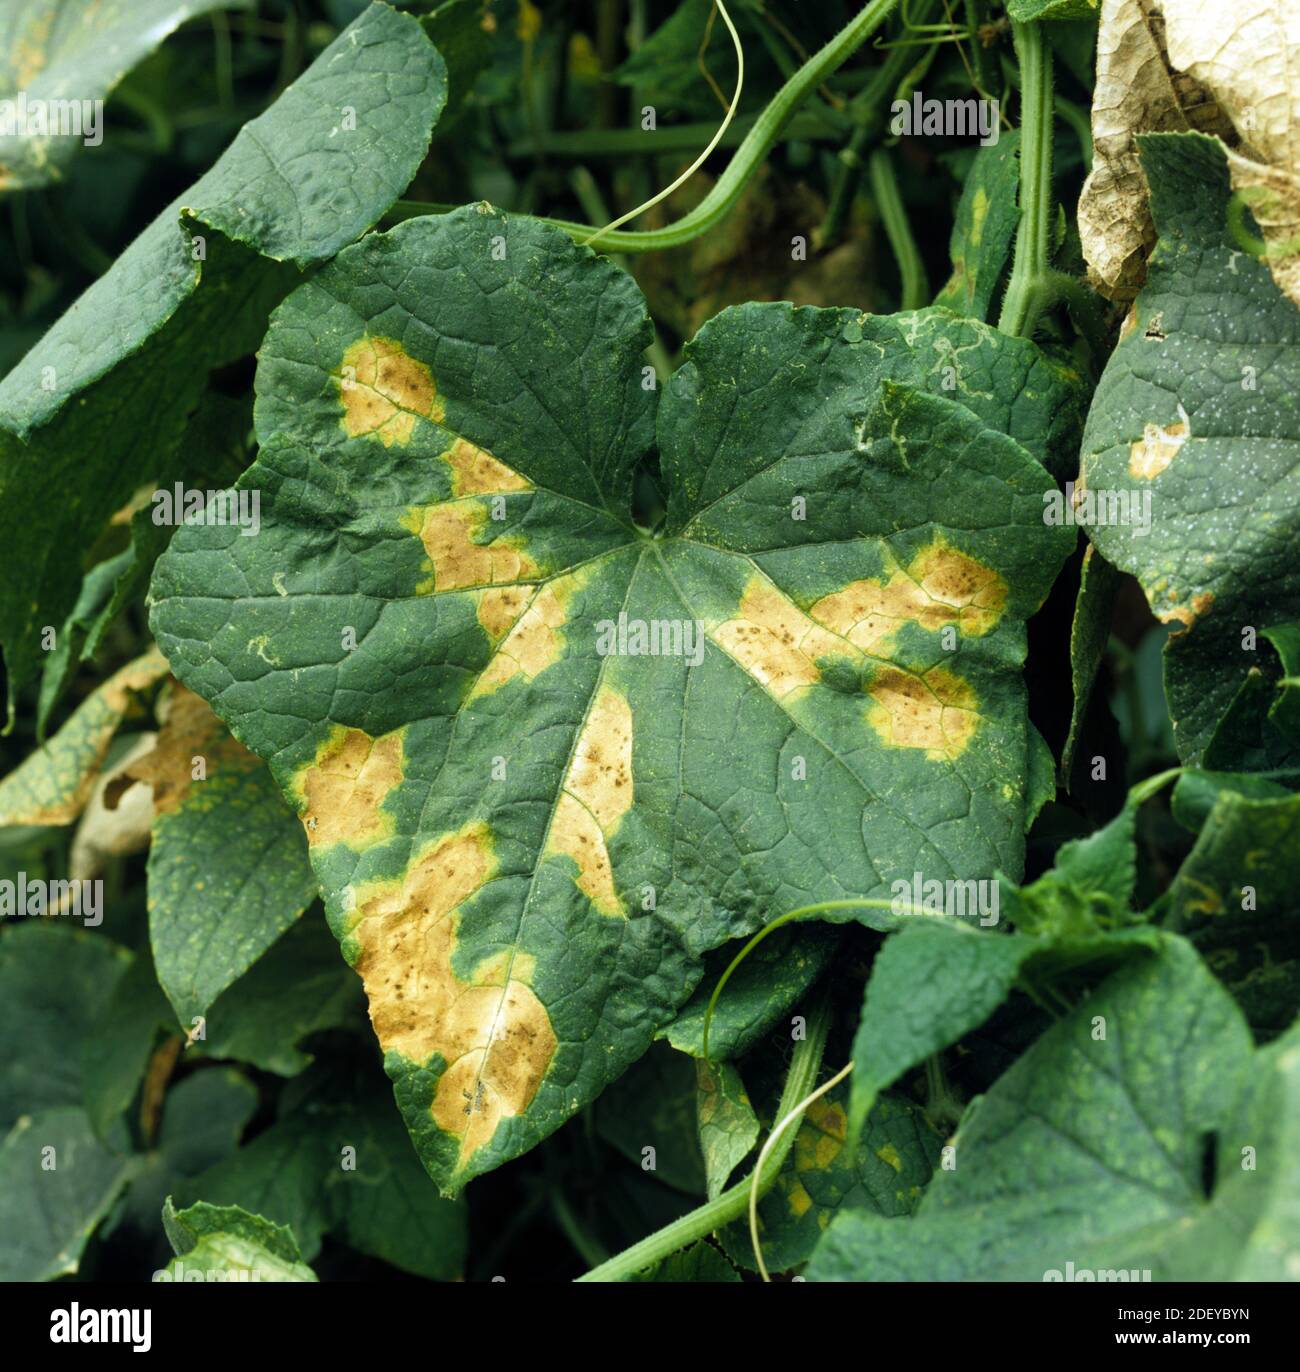 Downy mildew (Pseudoperonospora cubensis) a water mould causing downy mildew lesions on the leaf of a cucumber plant, Greece Stock Photo